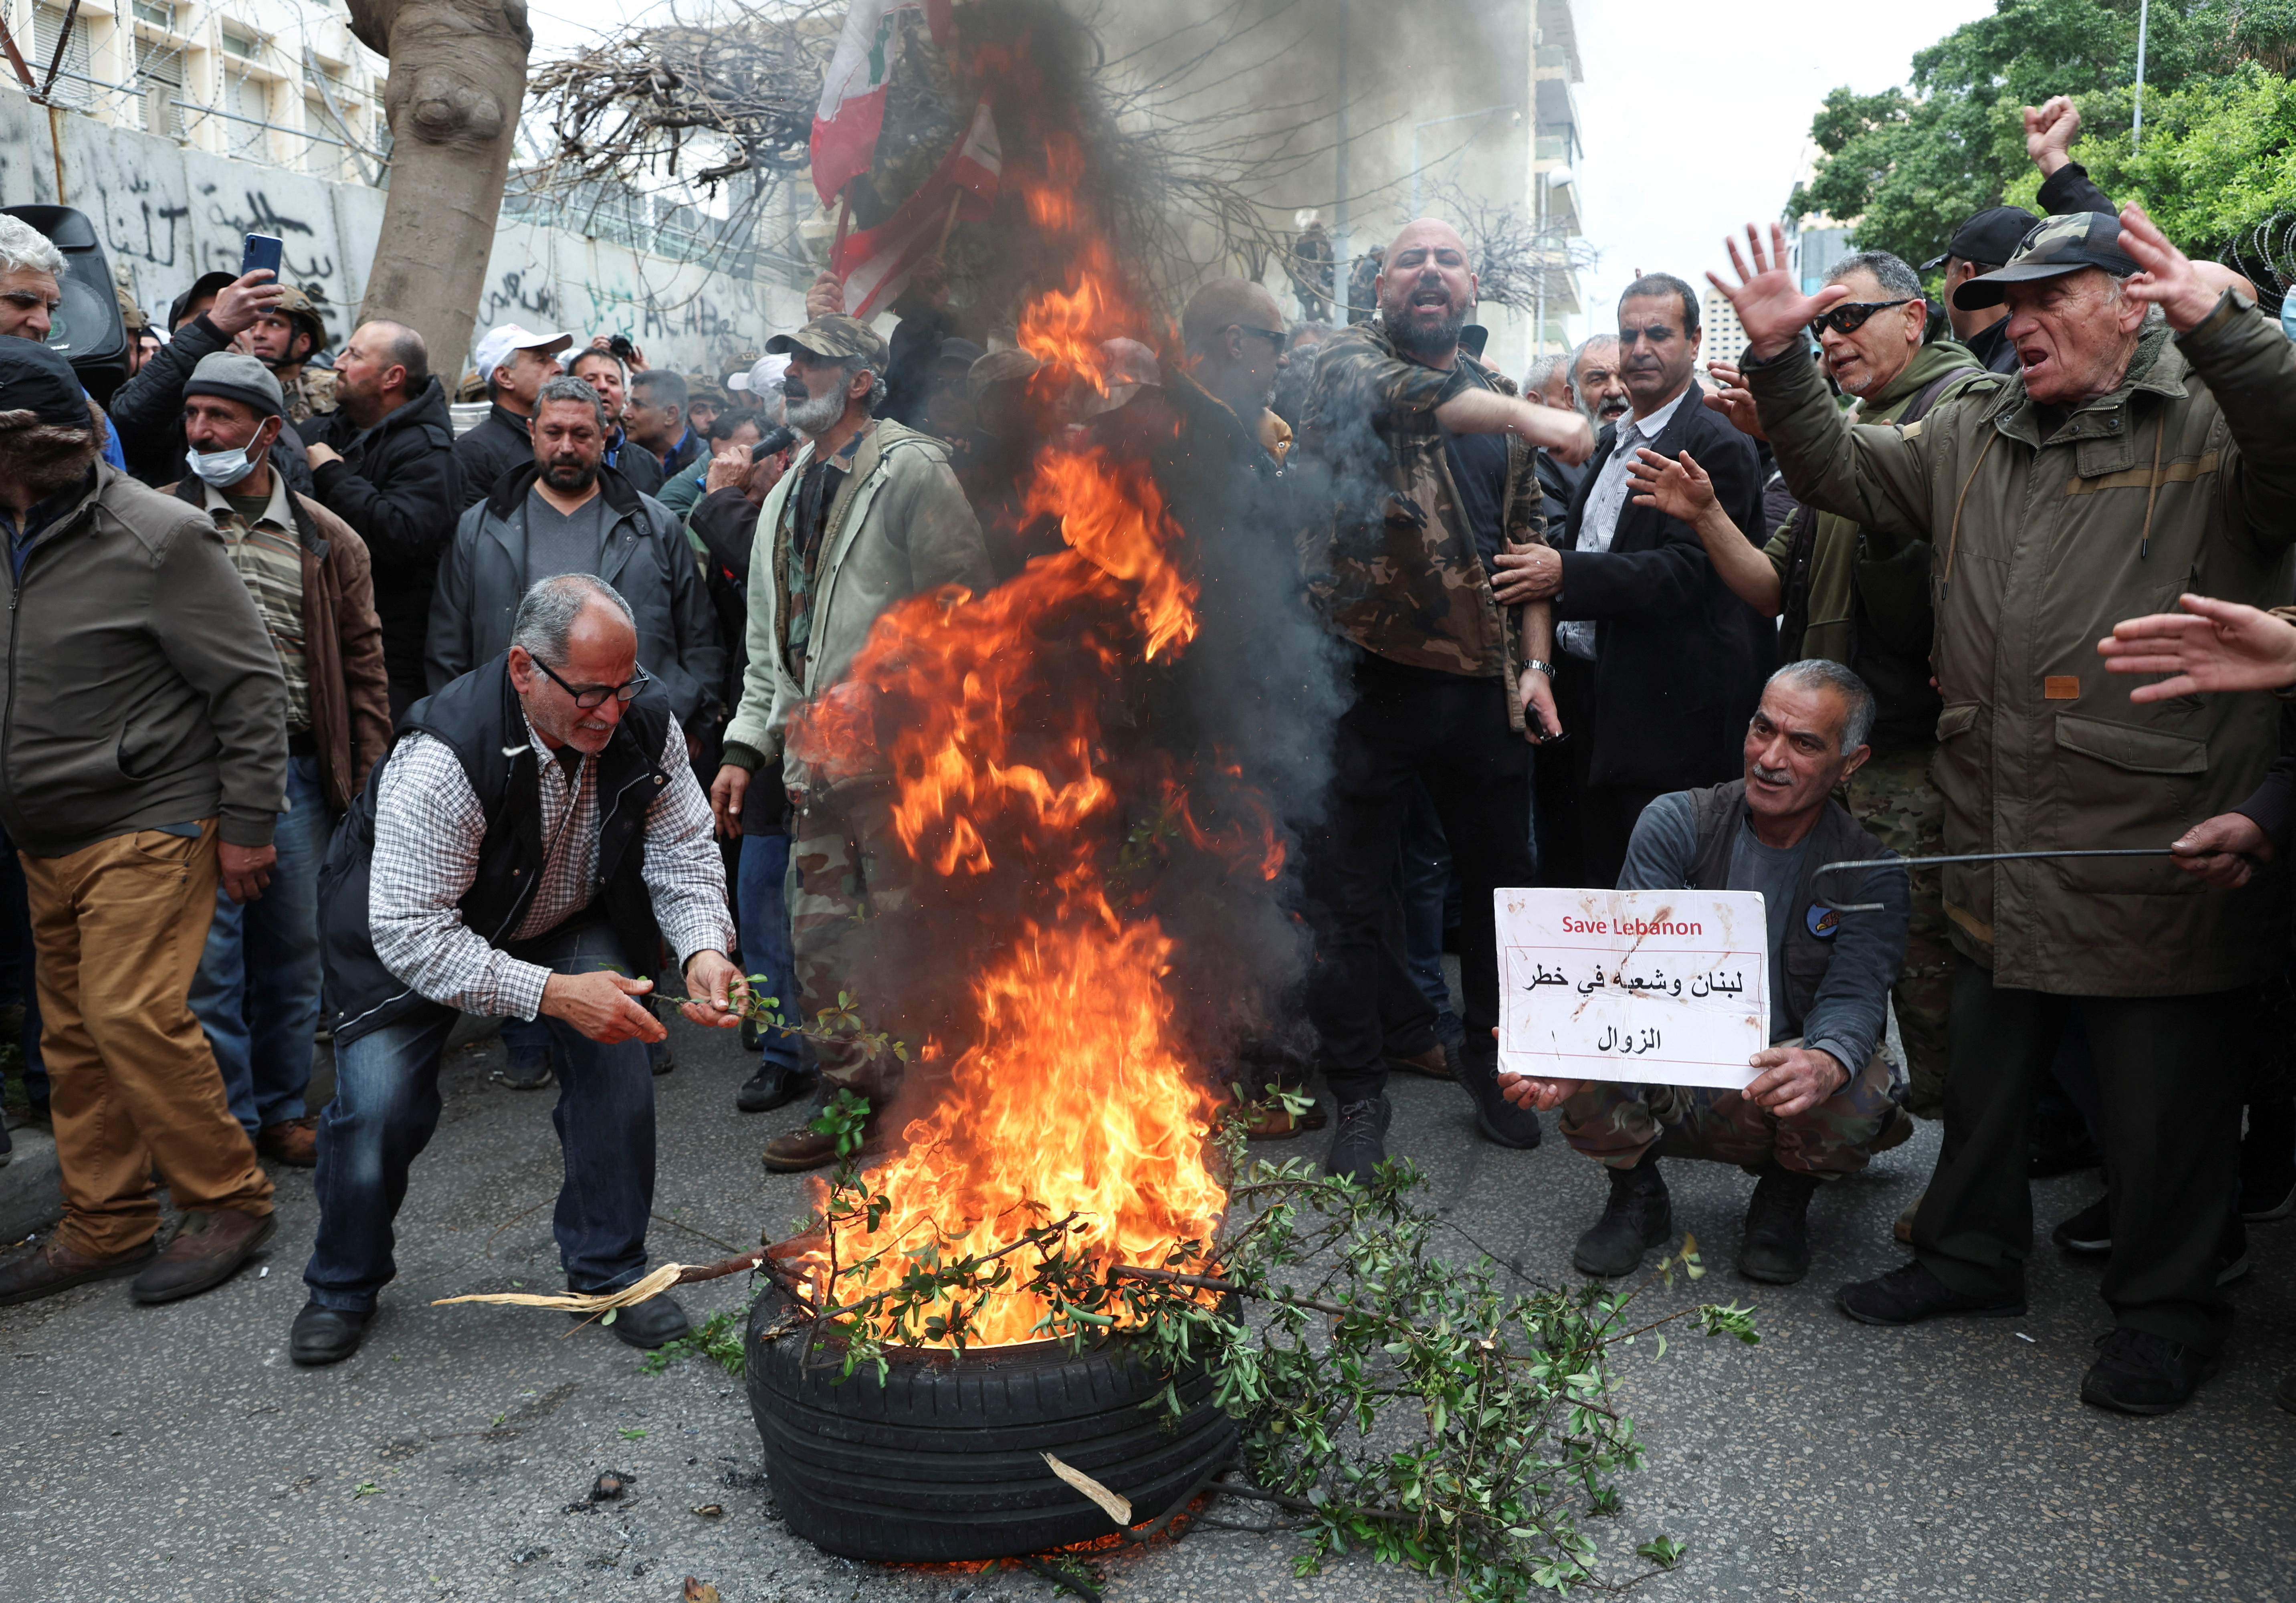 People protest over the deteriorating economic situation in Beirut